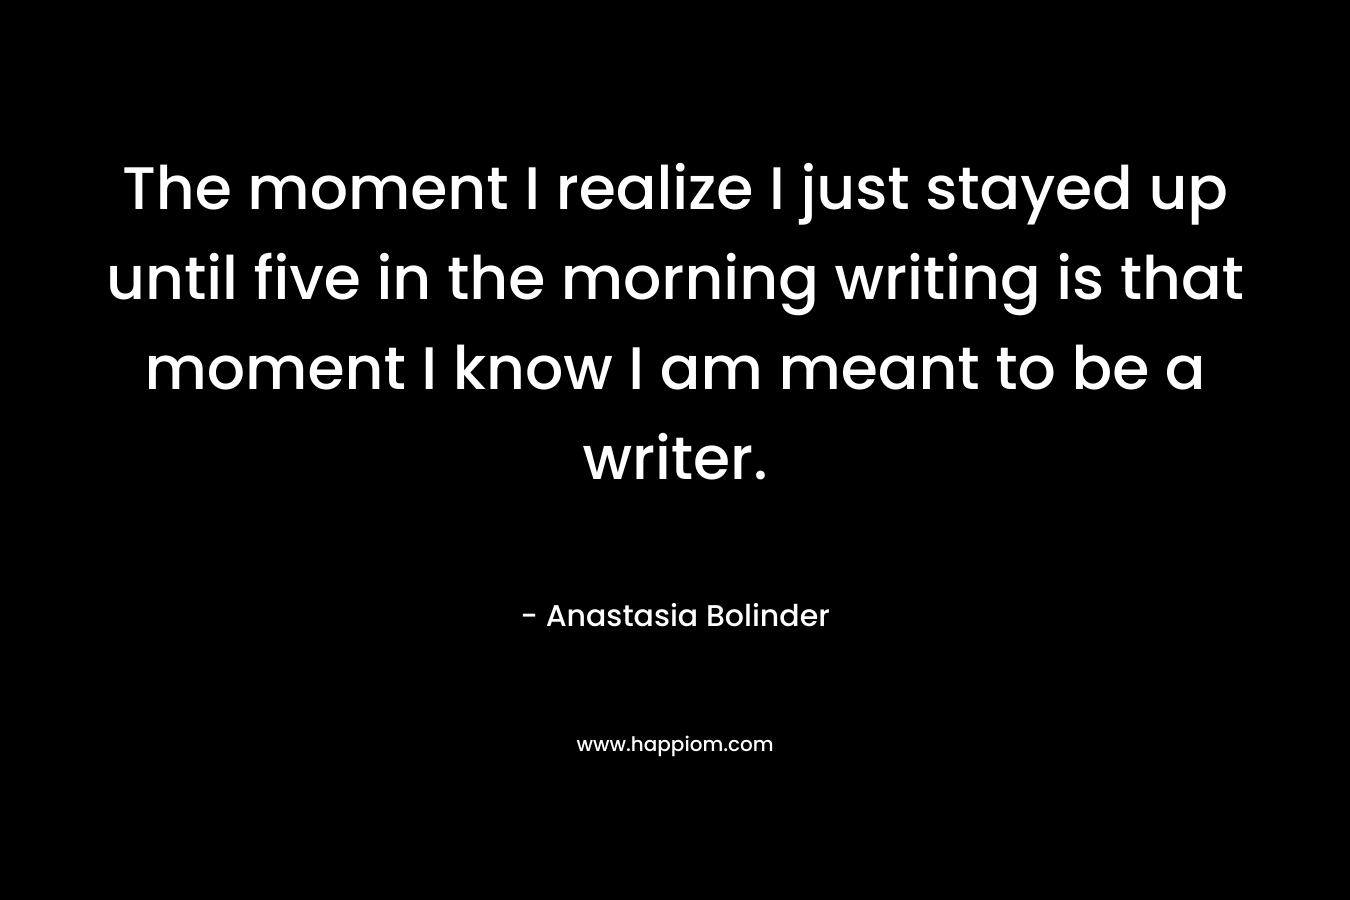 The moment I realize I just stayed up until five in the morning writing is that moment I know I am meant to be a writer.